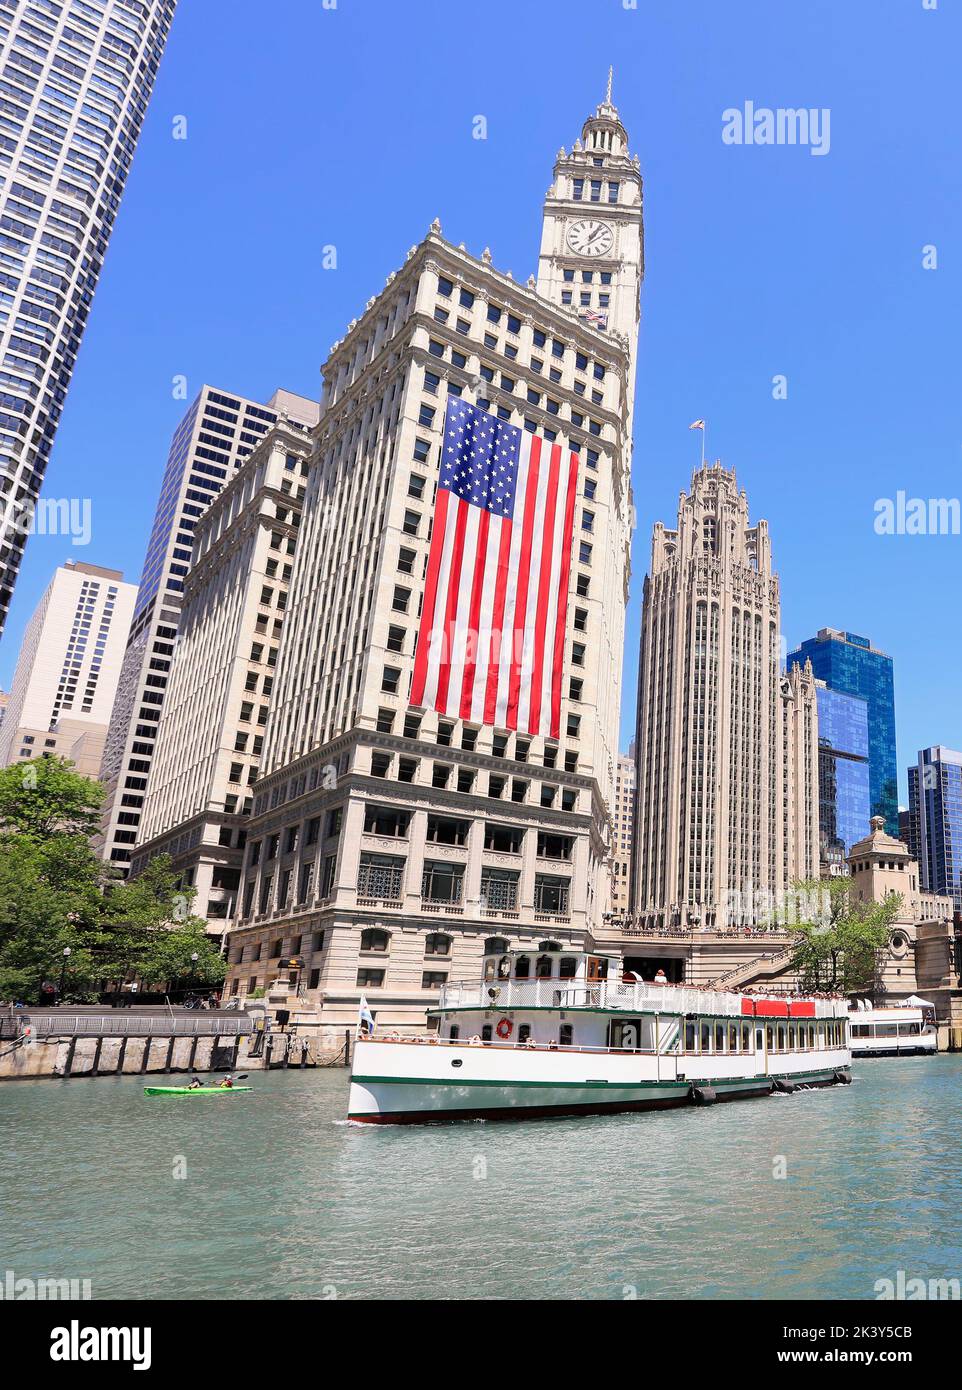 Chicago sightseeing cruise and skyline on the river including a huge American flag, Illinois, USA Stock Photo